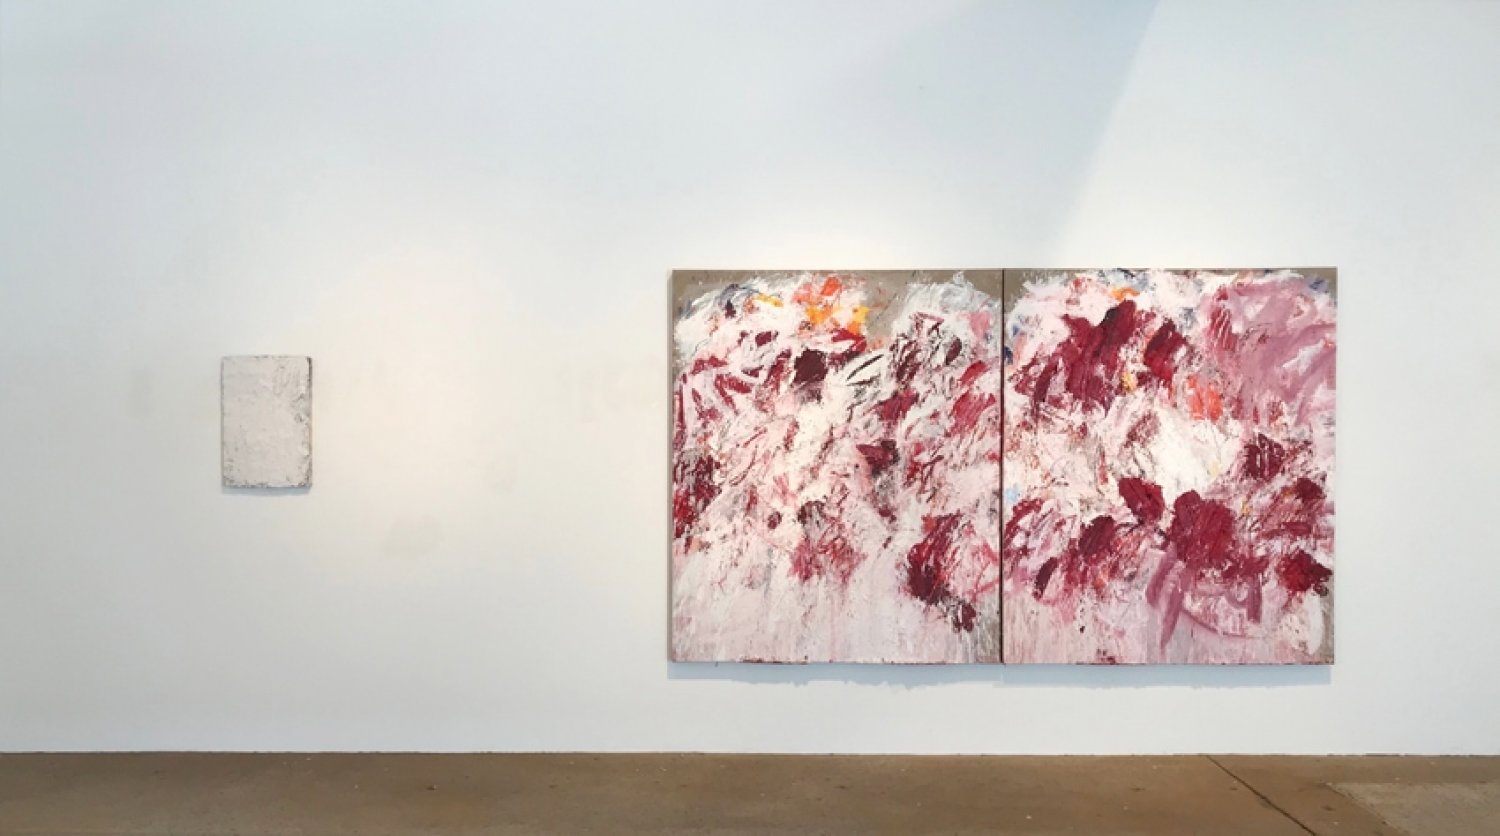 Aida Tomescu, Left: In a carpet made of water, 2017 oil and silver pigment on wood panel, 60 x40 cm. Right: Under the Iron of the Moon I, 2017 oil and silver pigment on canvas, 183 x 306 cm